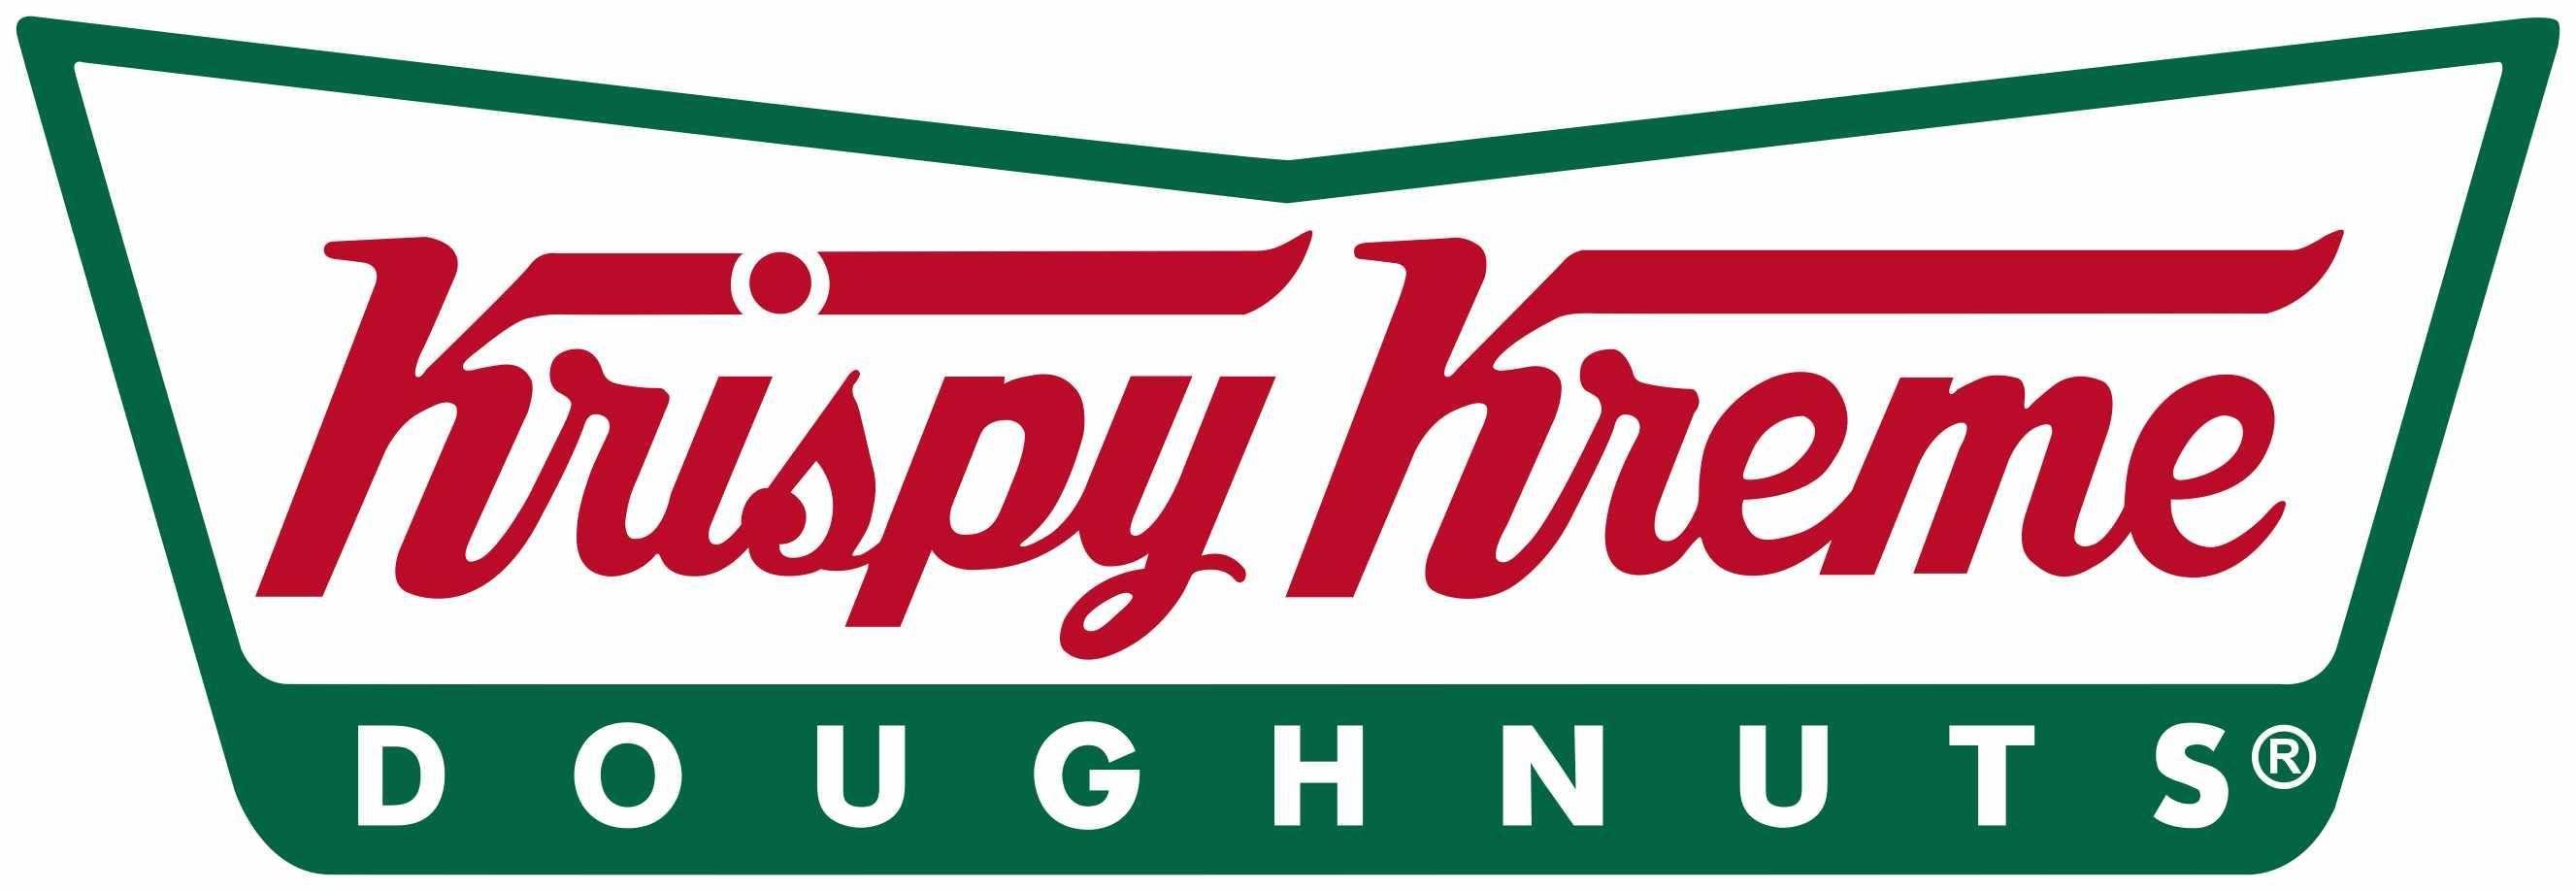 Complementary Color Logo - Krispy Kreme logo- Example of use of complementary colors | Design ...